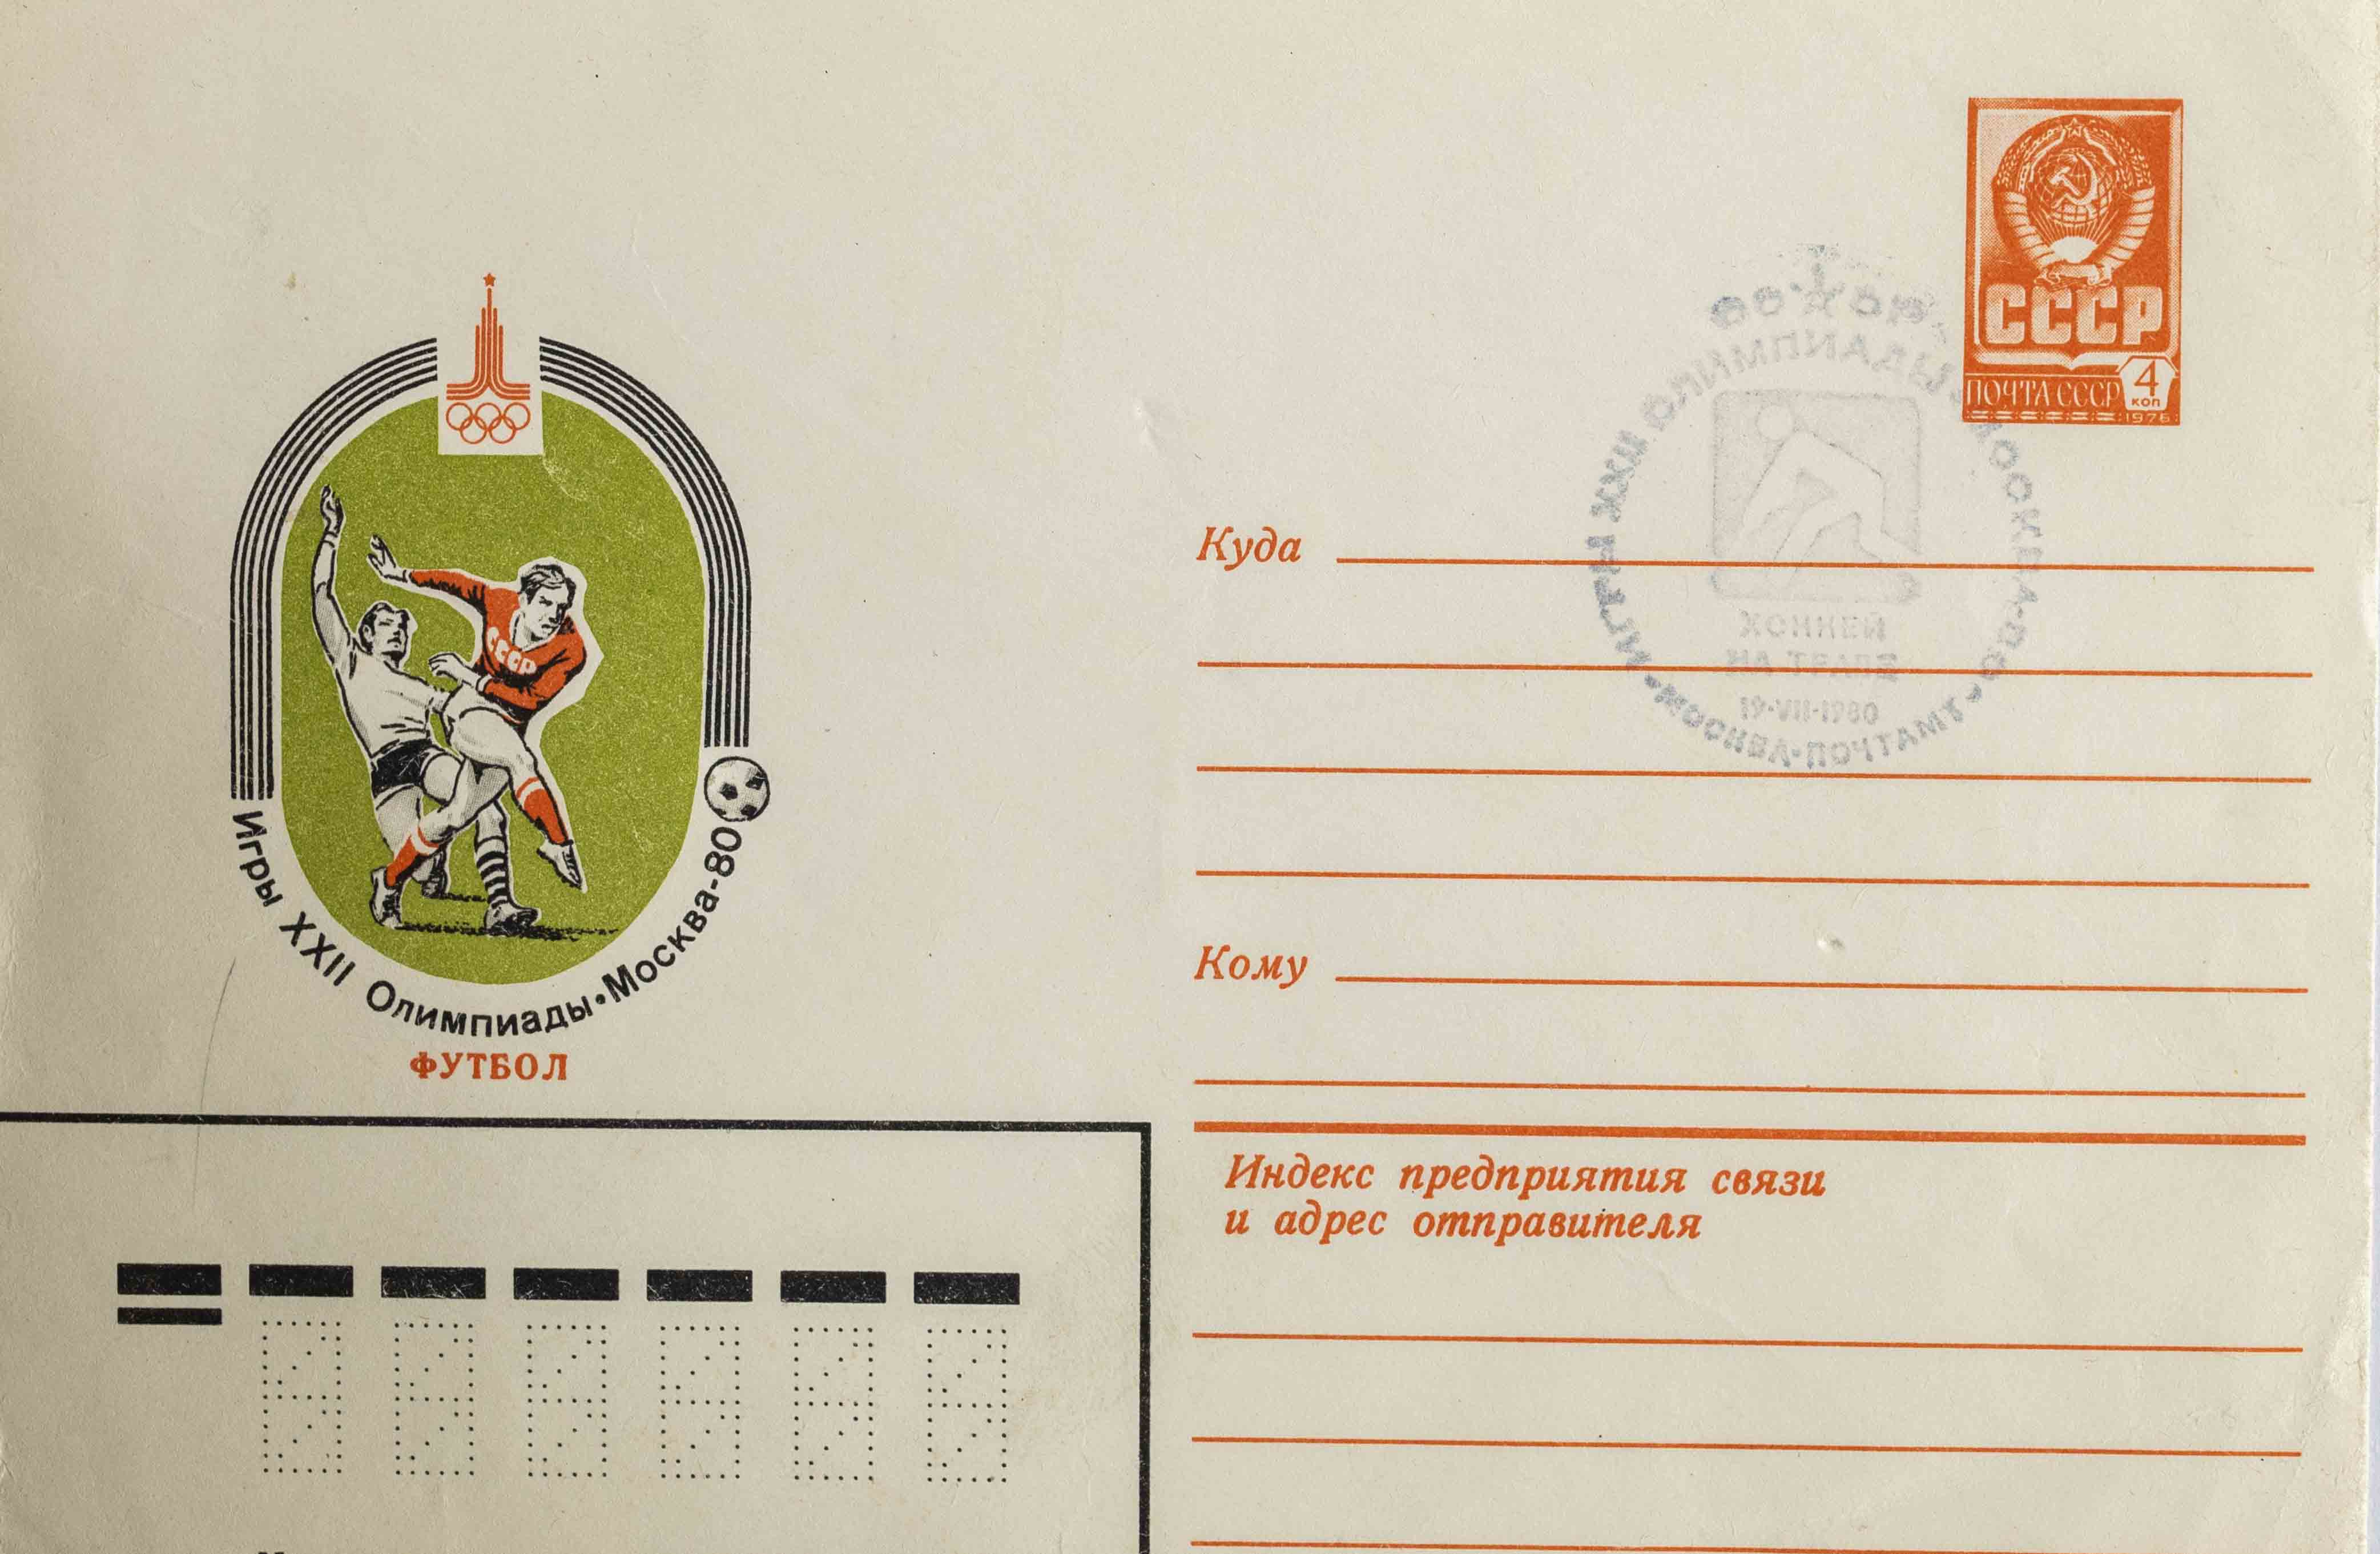 FDC, Olympic games Moscow, fotbal, 1980